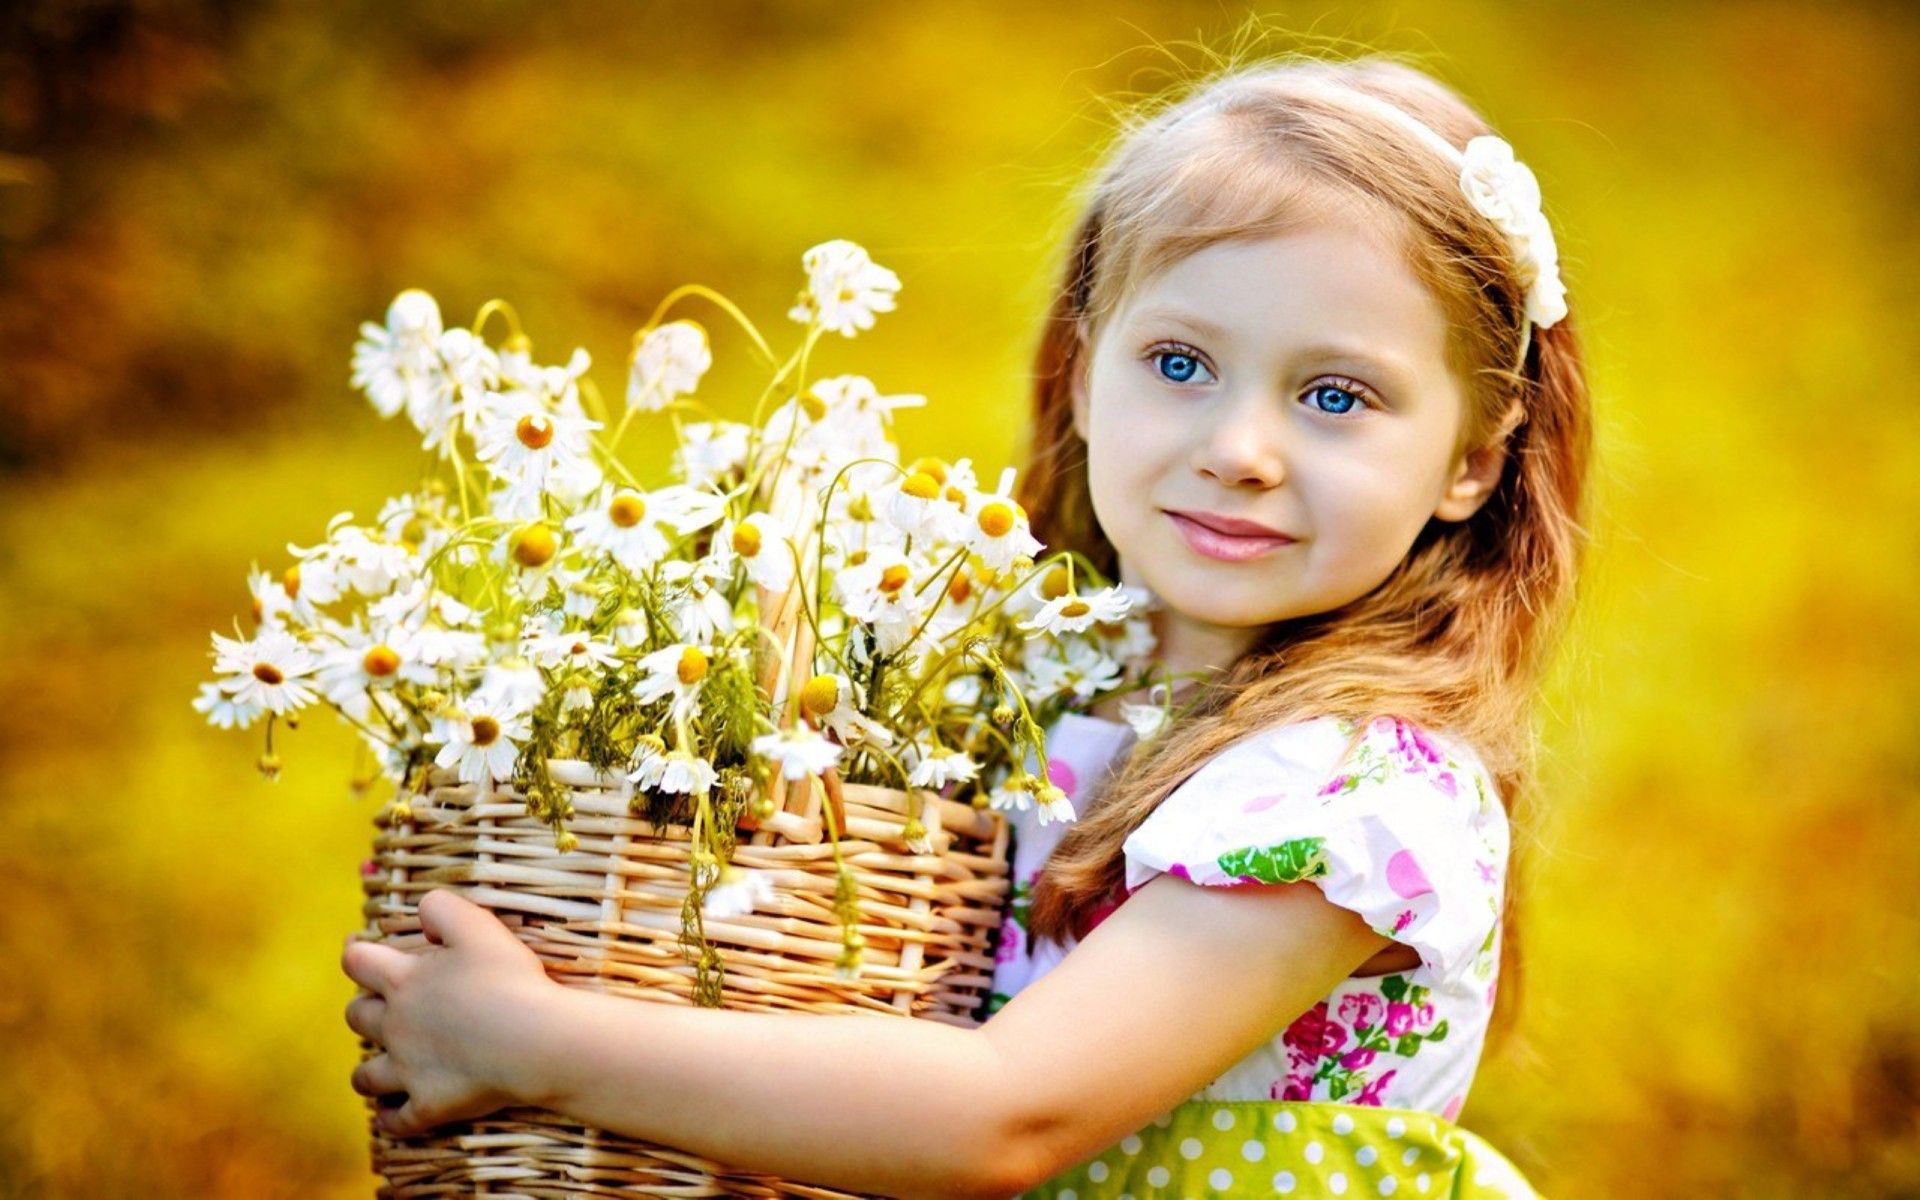 HQFX Wallpaper: Girls With Flowers Image For Desktop, Free Download, PTP HQFX